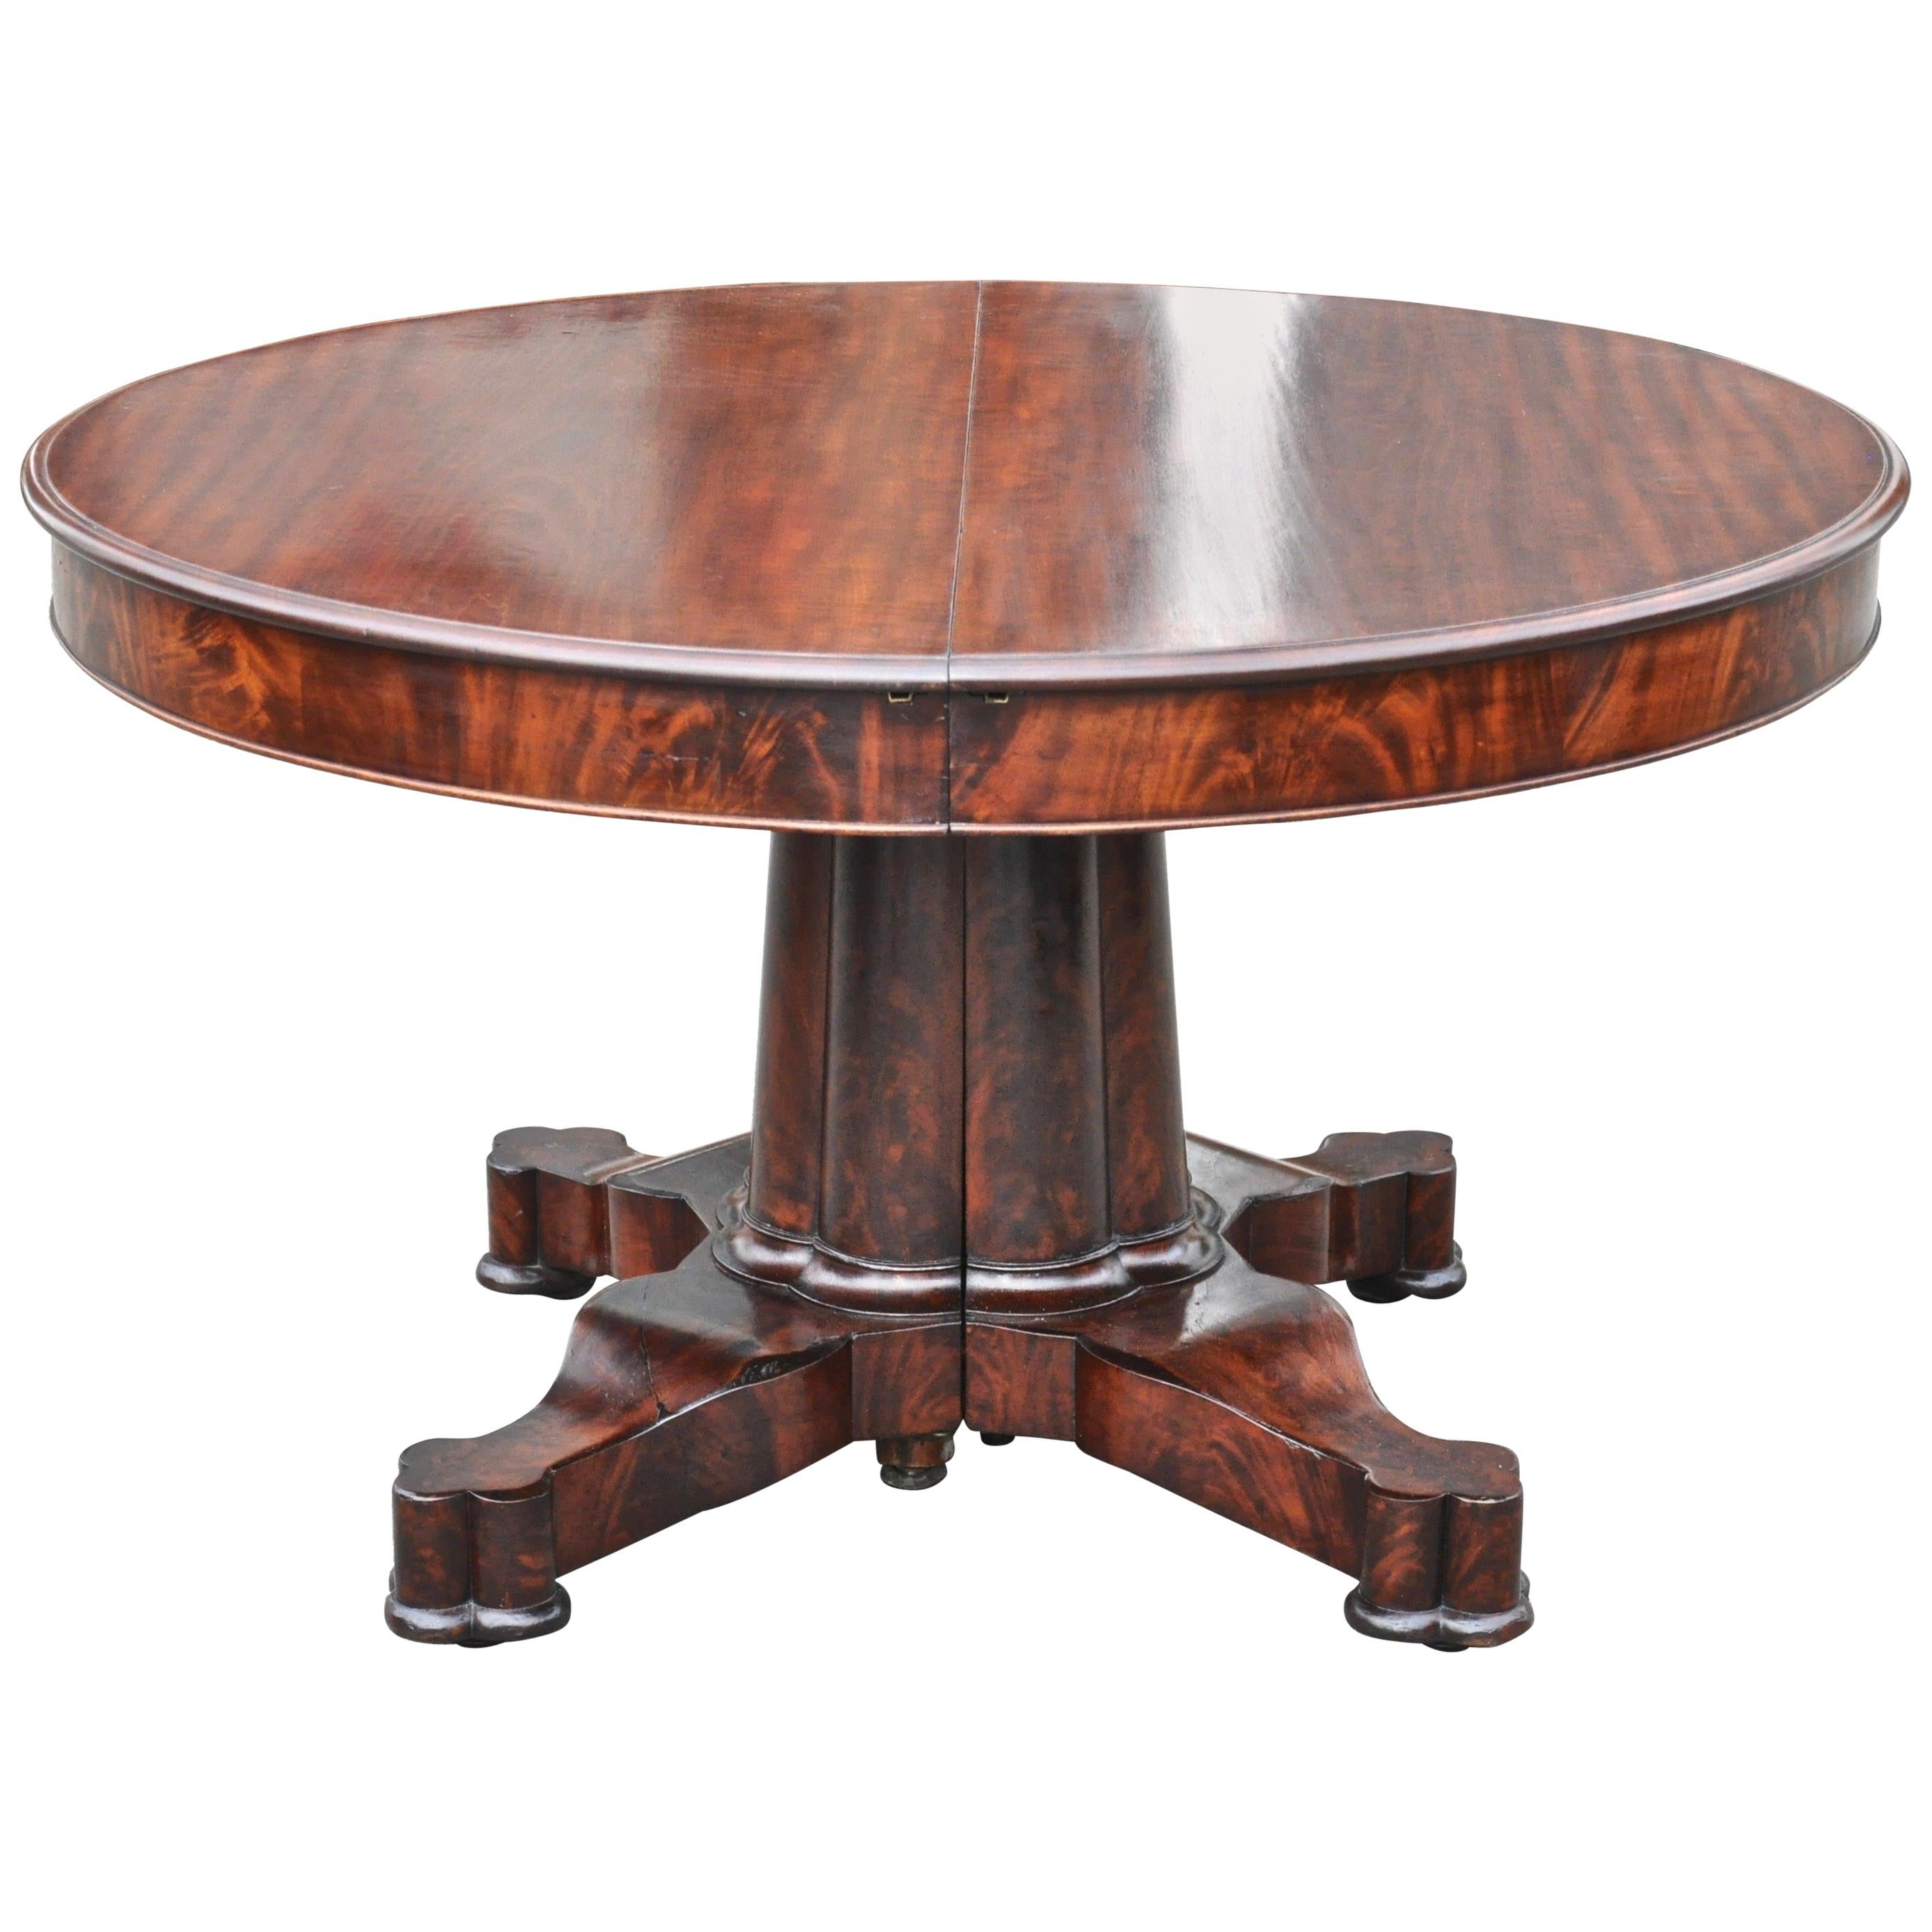 Period American Early 19th Century Round Extension Dining Table by Charles Hobe